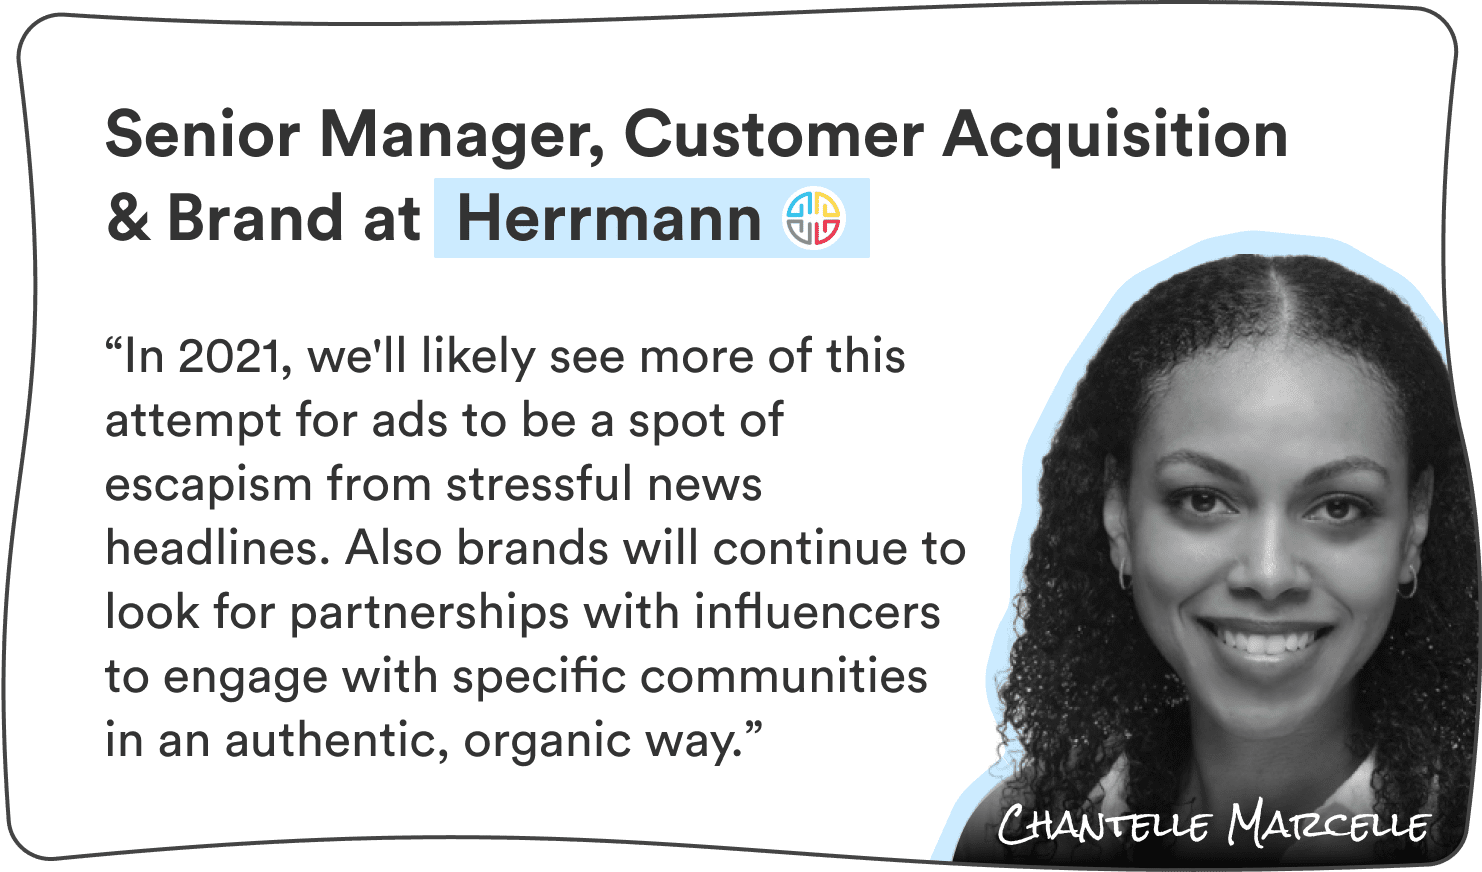 Chantelle Marcelle, Sr. Manager, Customer Acquisition & Brand at Herrmann: “In 2021, we’ll likely see more of this attempt for ads to be a spot of escapism from stressful news headlines. Also brands will continue to look for partnerships with influencers to engage with specific communities in an authentic, organic way.”